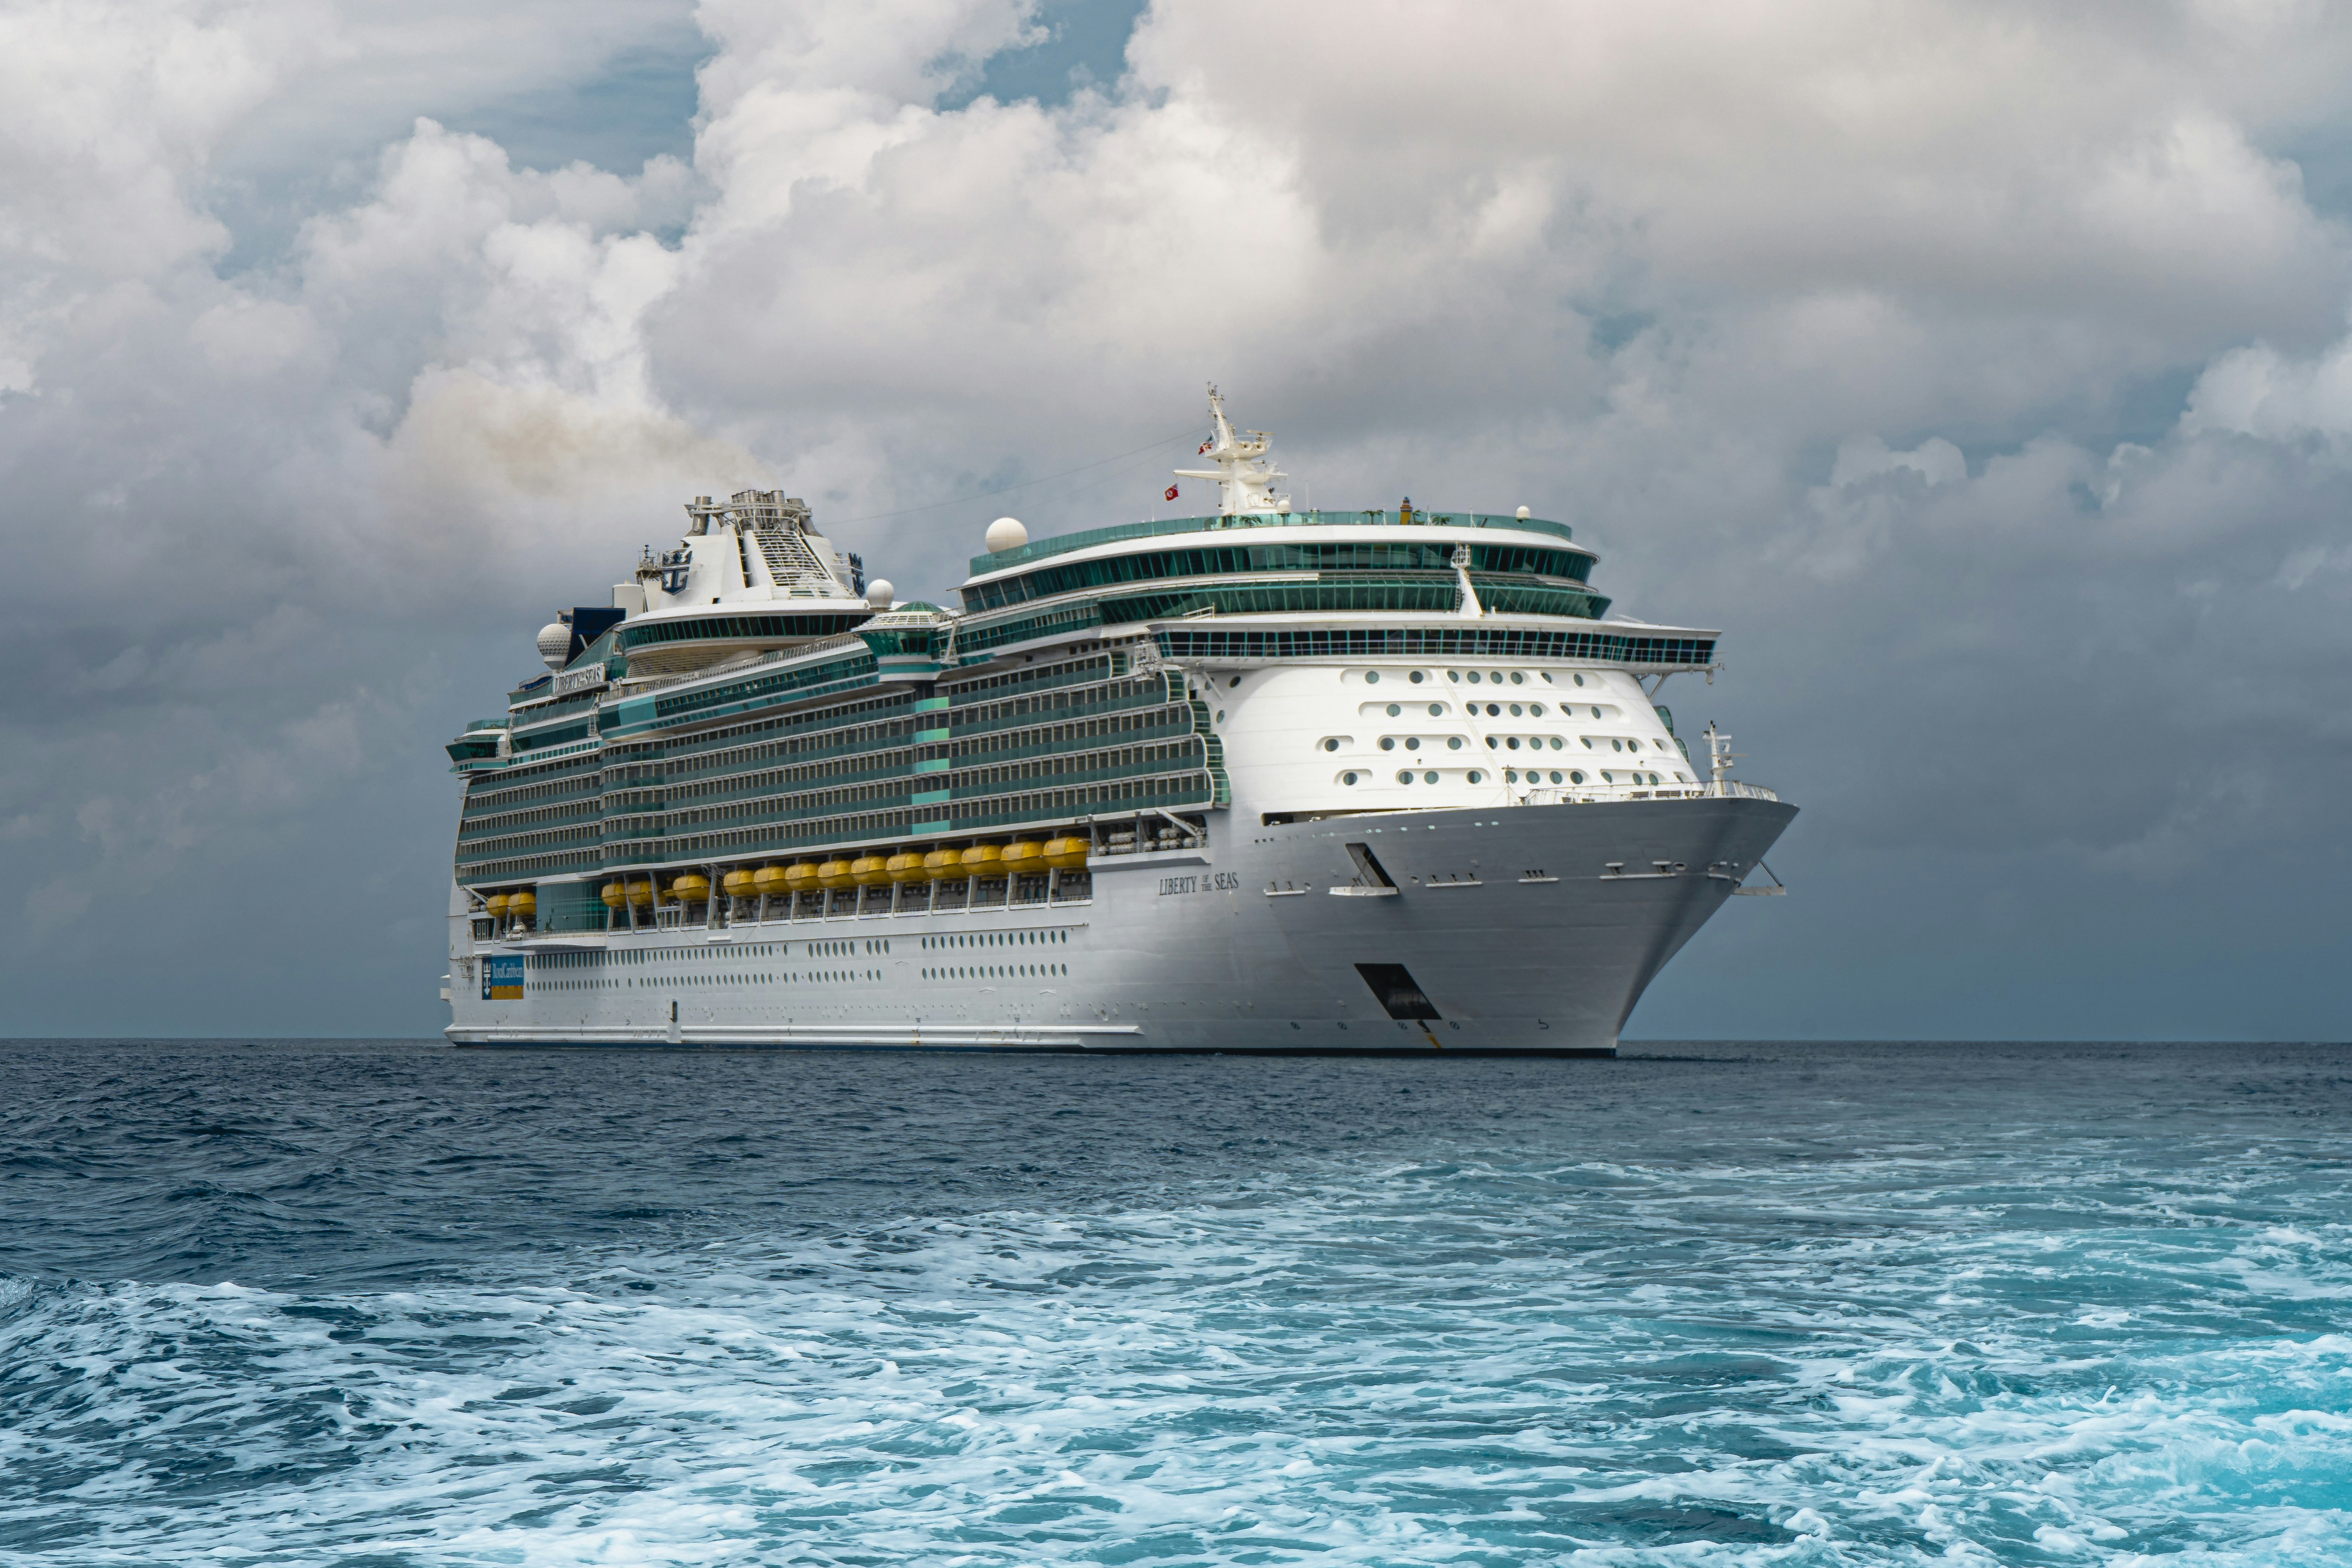 Passengers on Royal Caribbean's Liberty of the Seas cruise experienced a horrific incident when a 20-year-old man unexpectedly jumped overboard in the early hours of Thursday, reports the NY Post. 